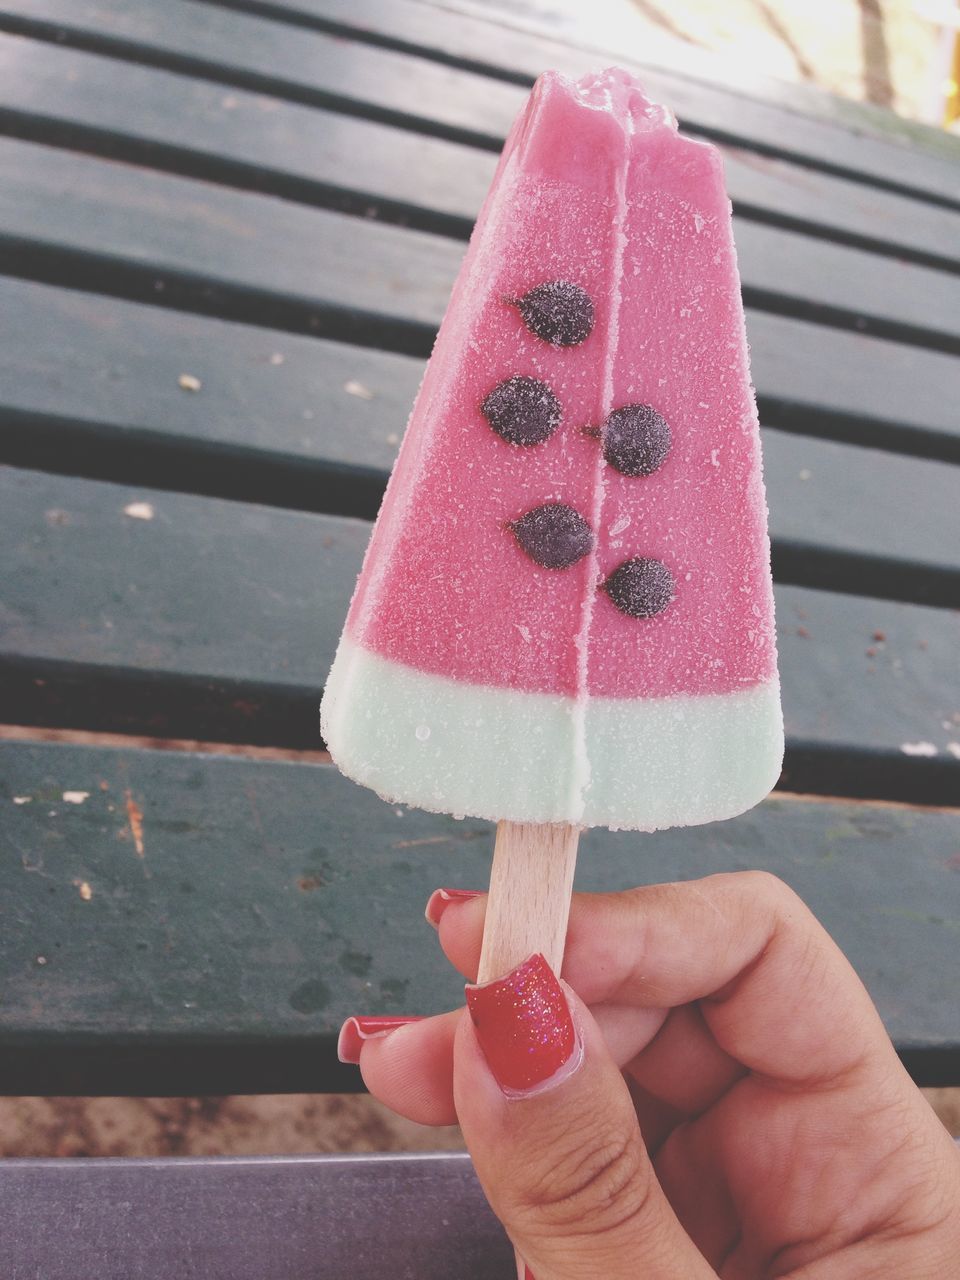 food and drink, sweet food, person, holding, frozen food, freshness, ice cream, food, dessert, indulgence, unhealthy eating, strawberry, part of, ice cream cone, red, temptation, close-up